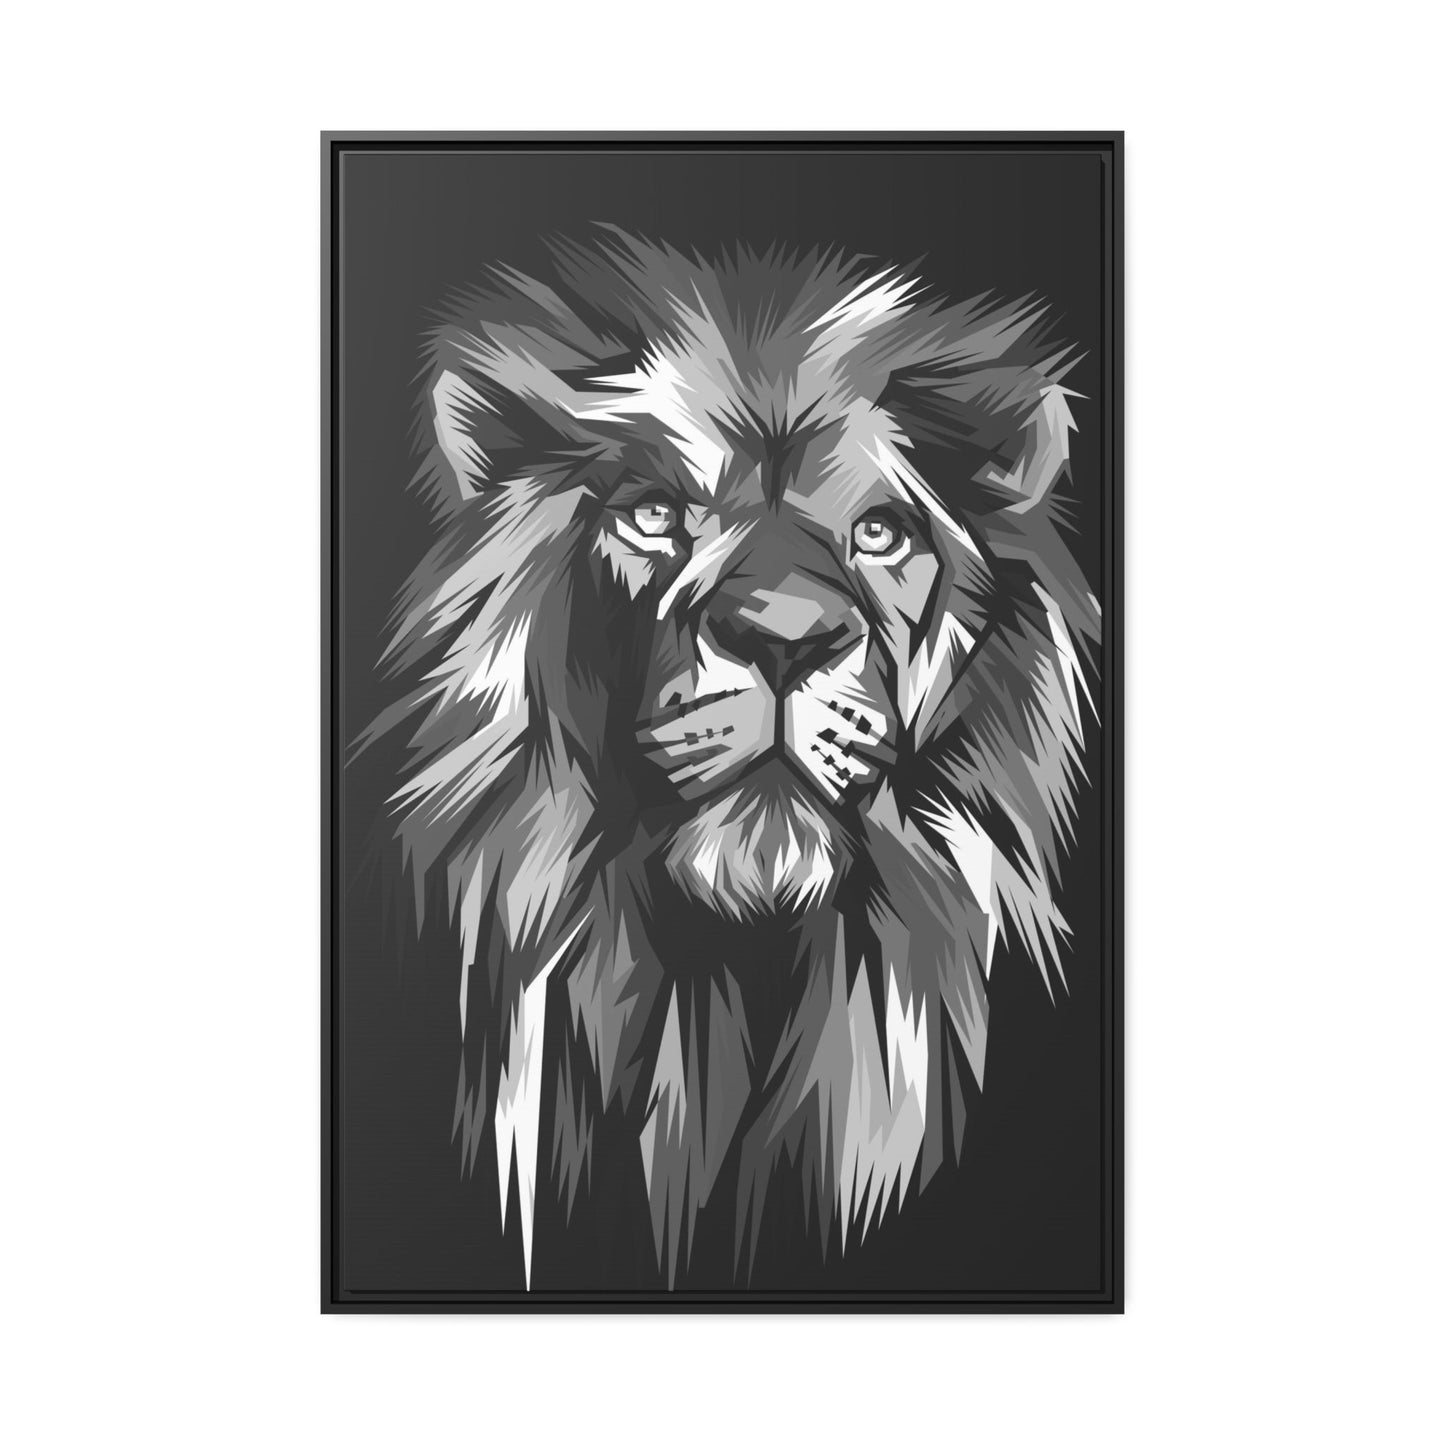 The Lion's Crown: Framed Poster of the King of the Jungle